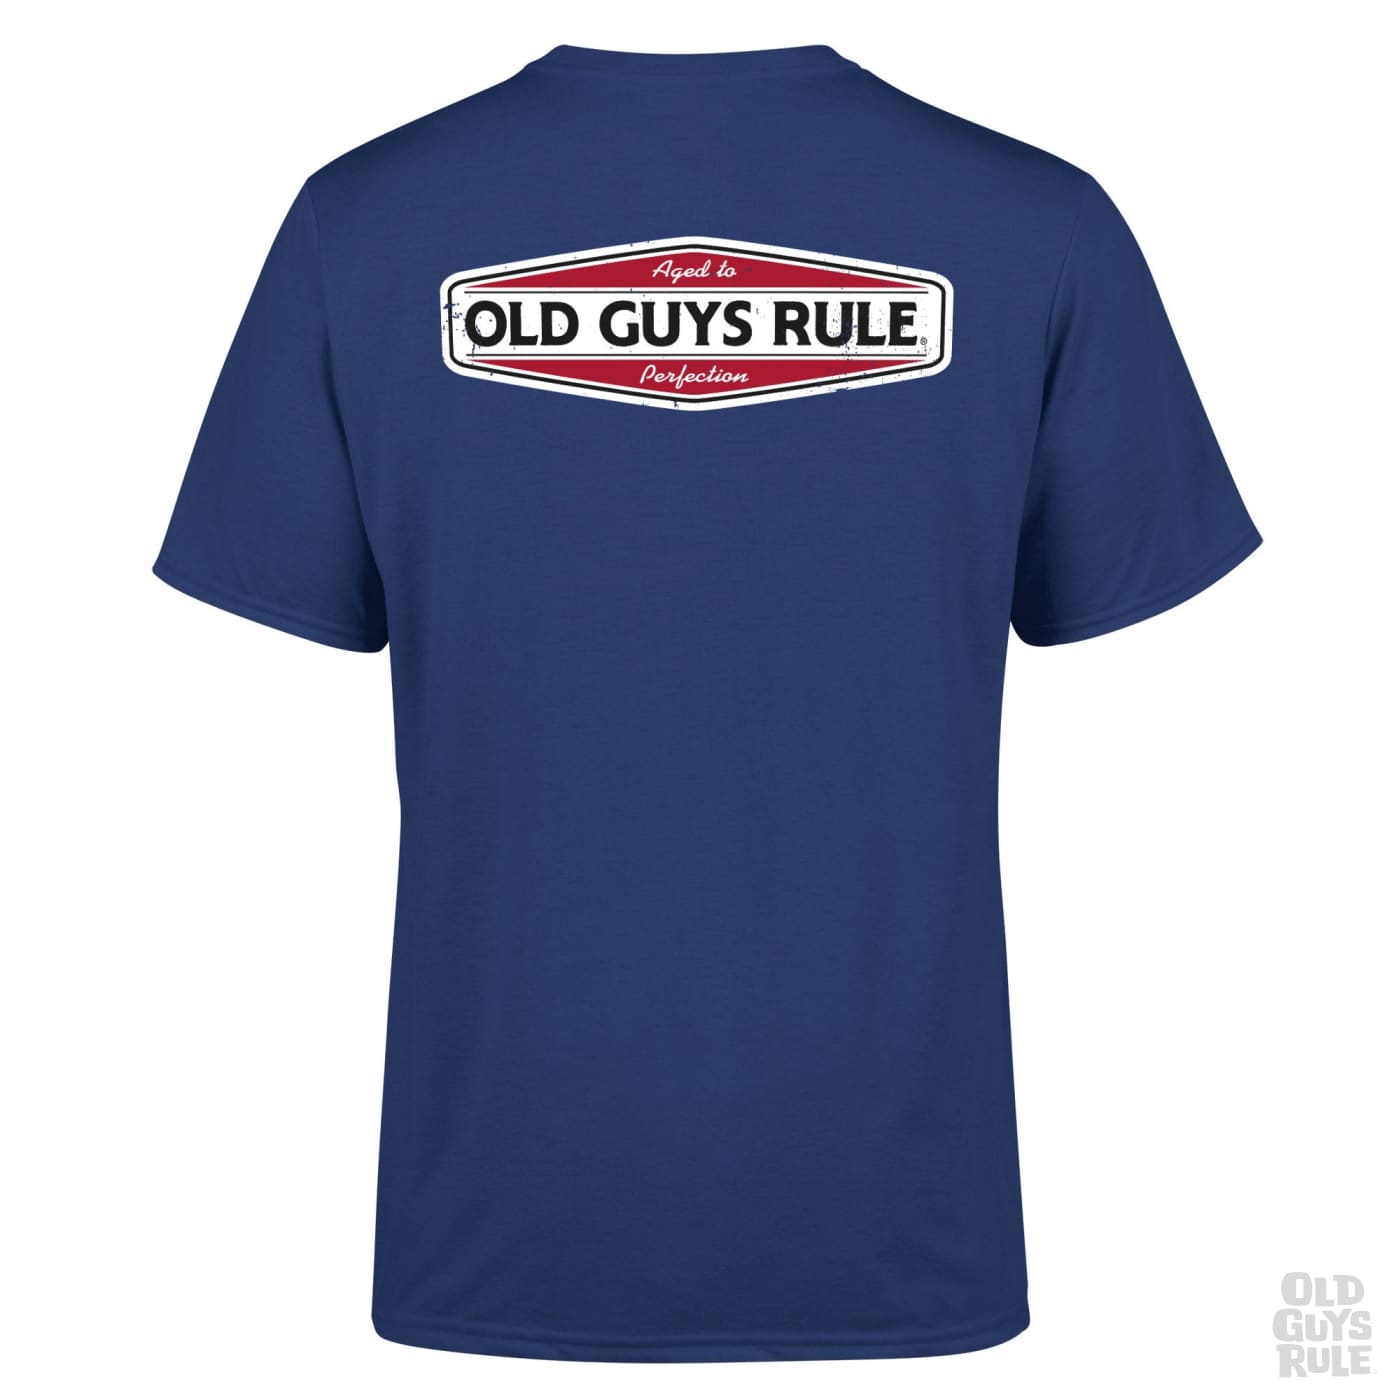 Old Guys Rule Aged To Perfection II T-Shirt - Metro Blue